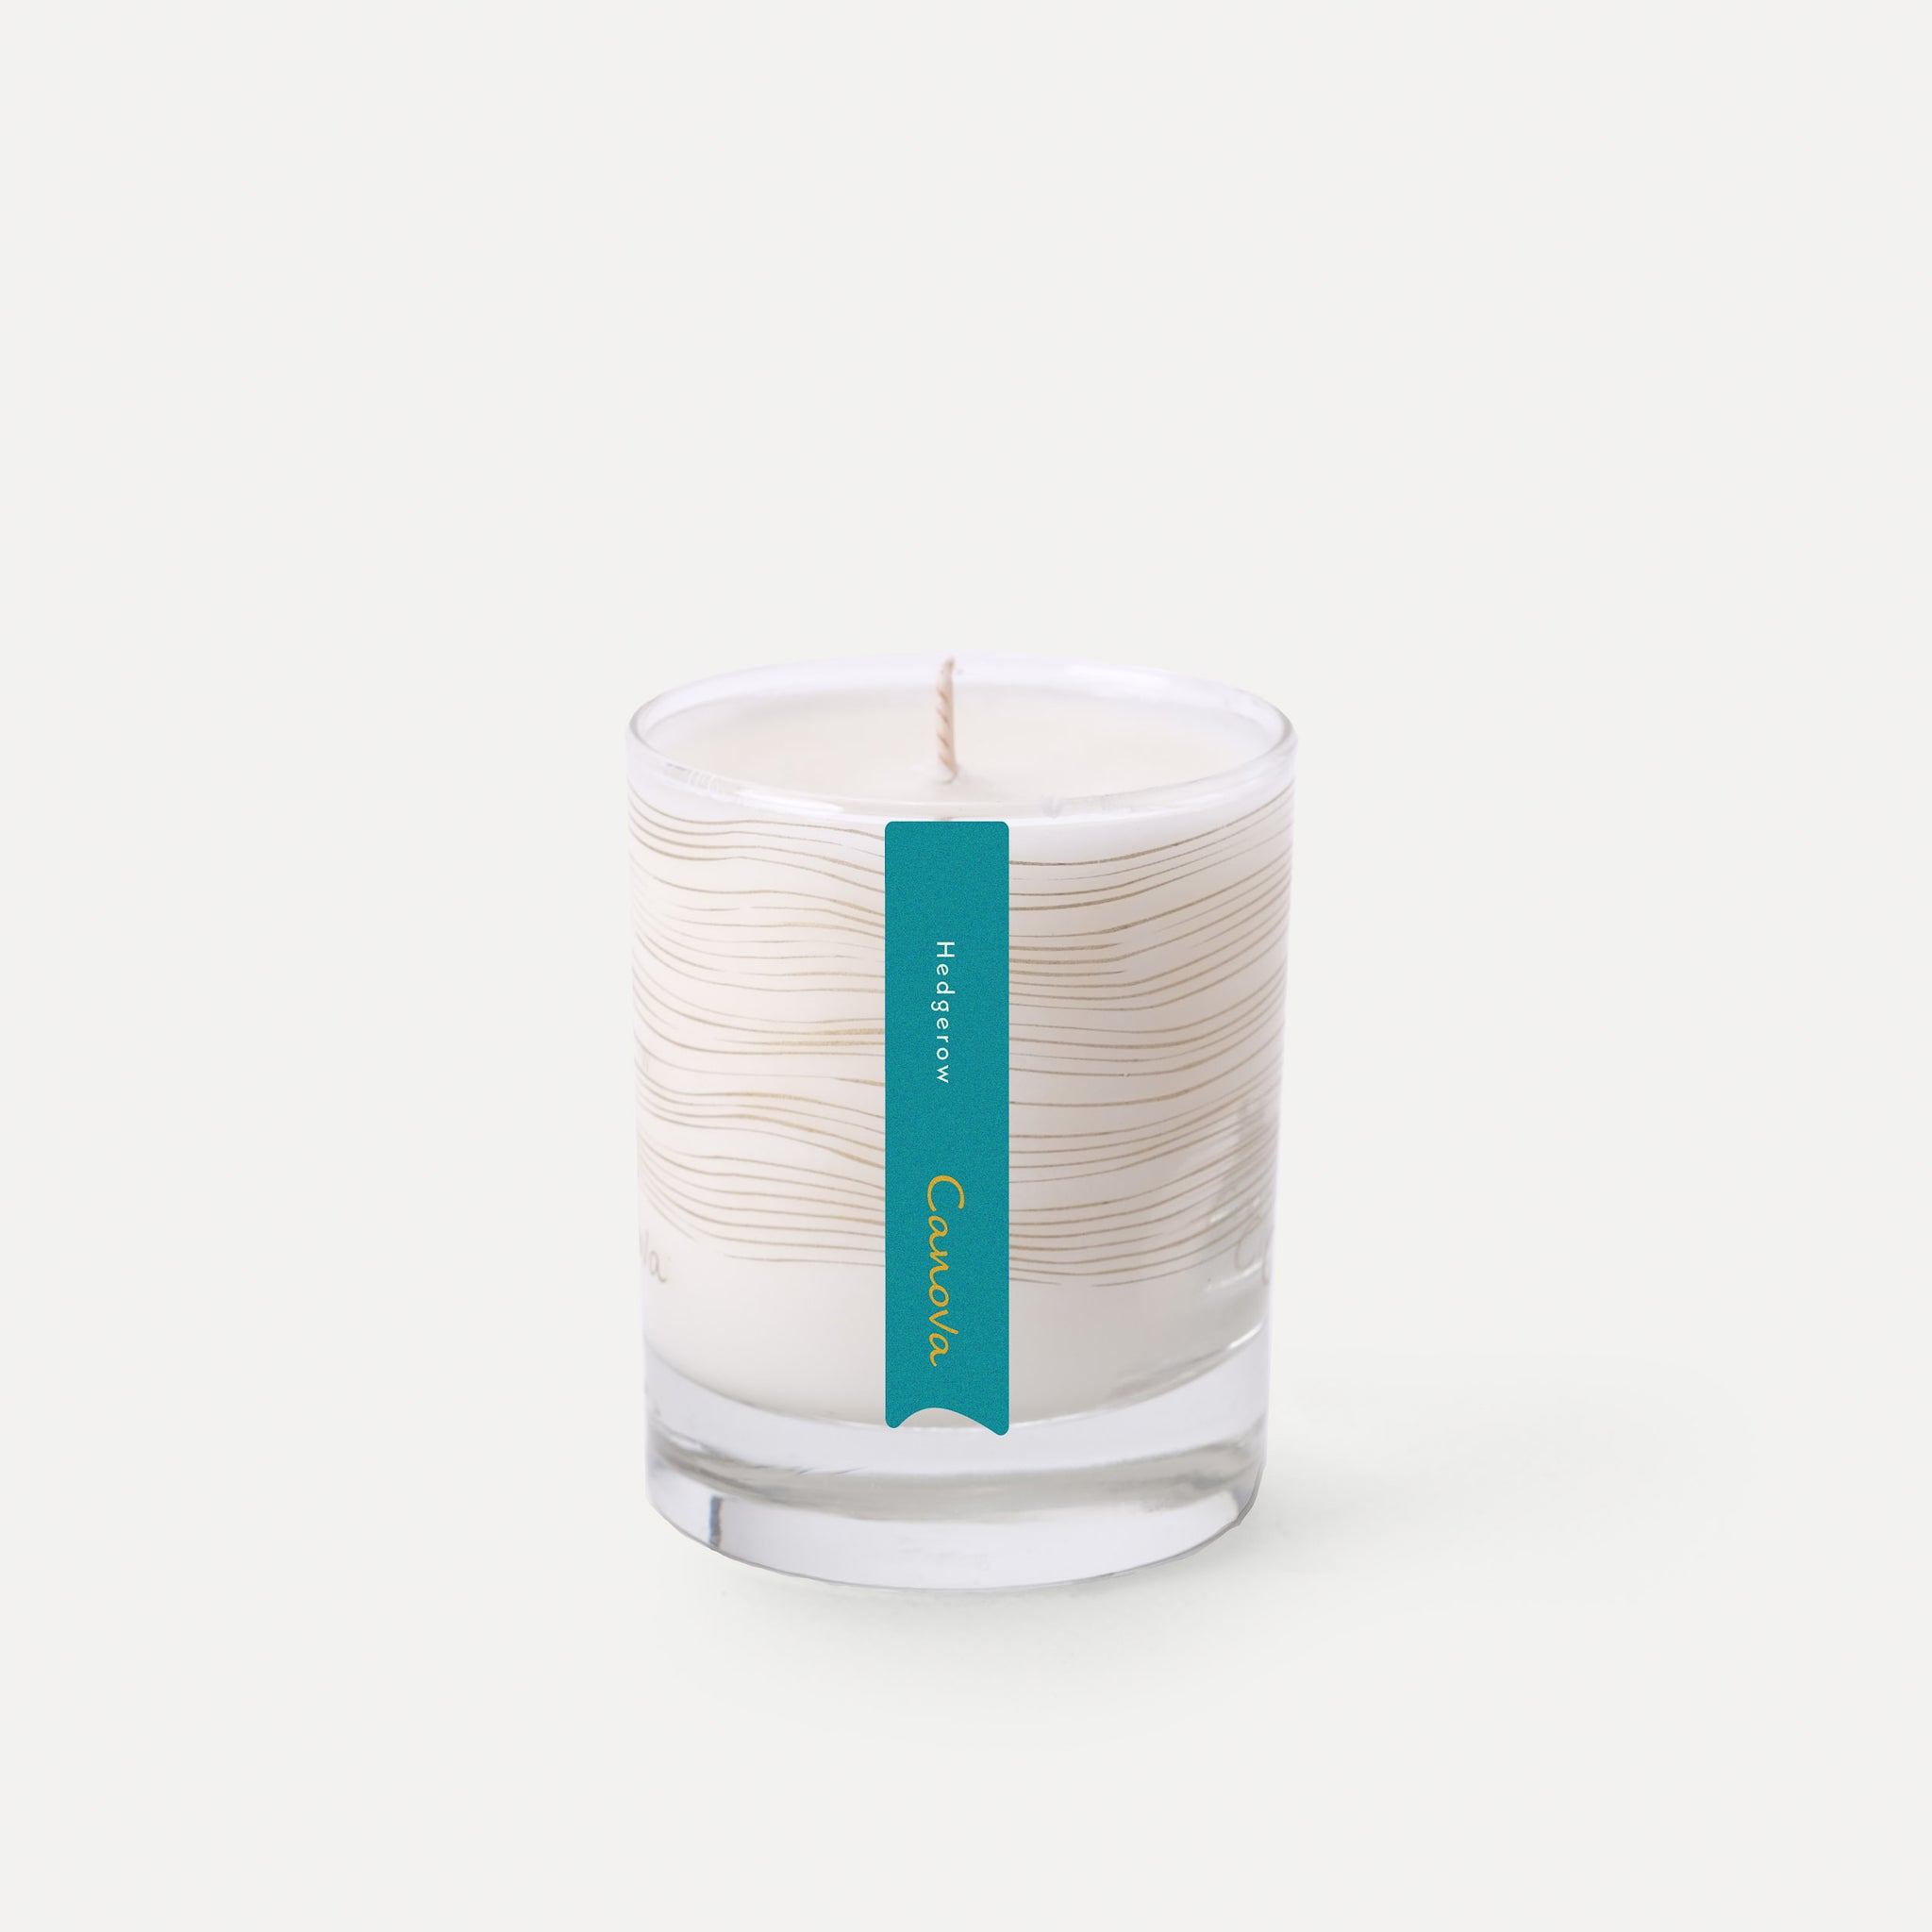 170g Signature - Hedgerow Candle